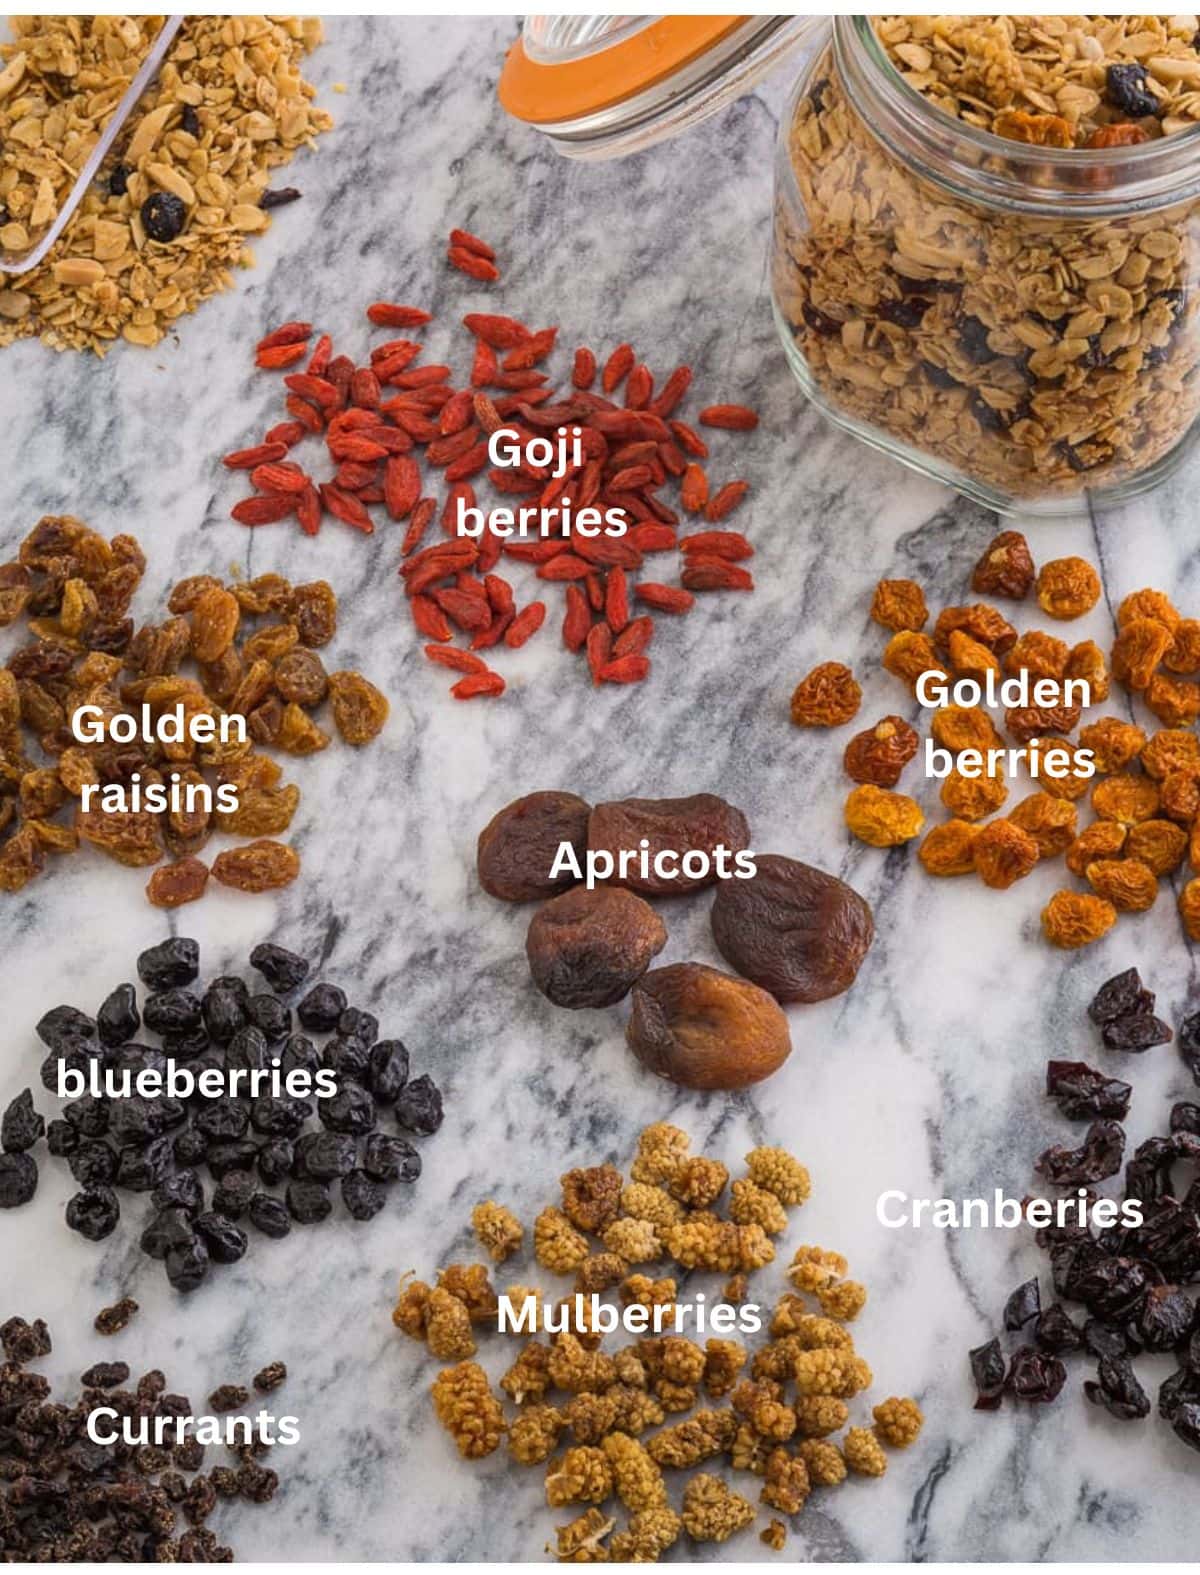 Examples of dried fruit options for homemade granola.